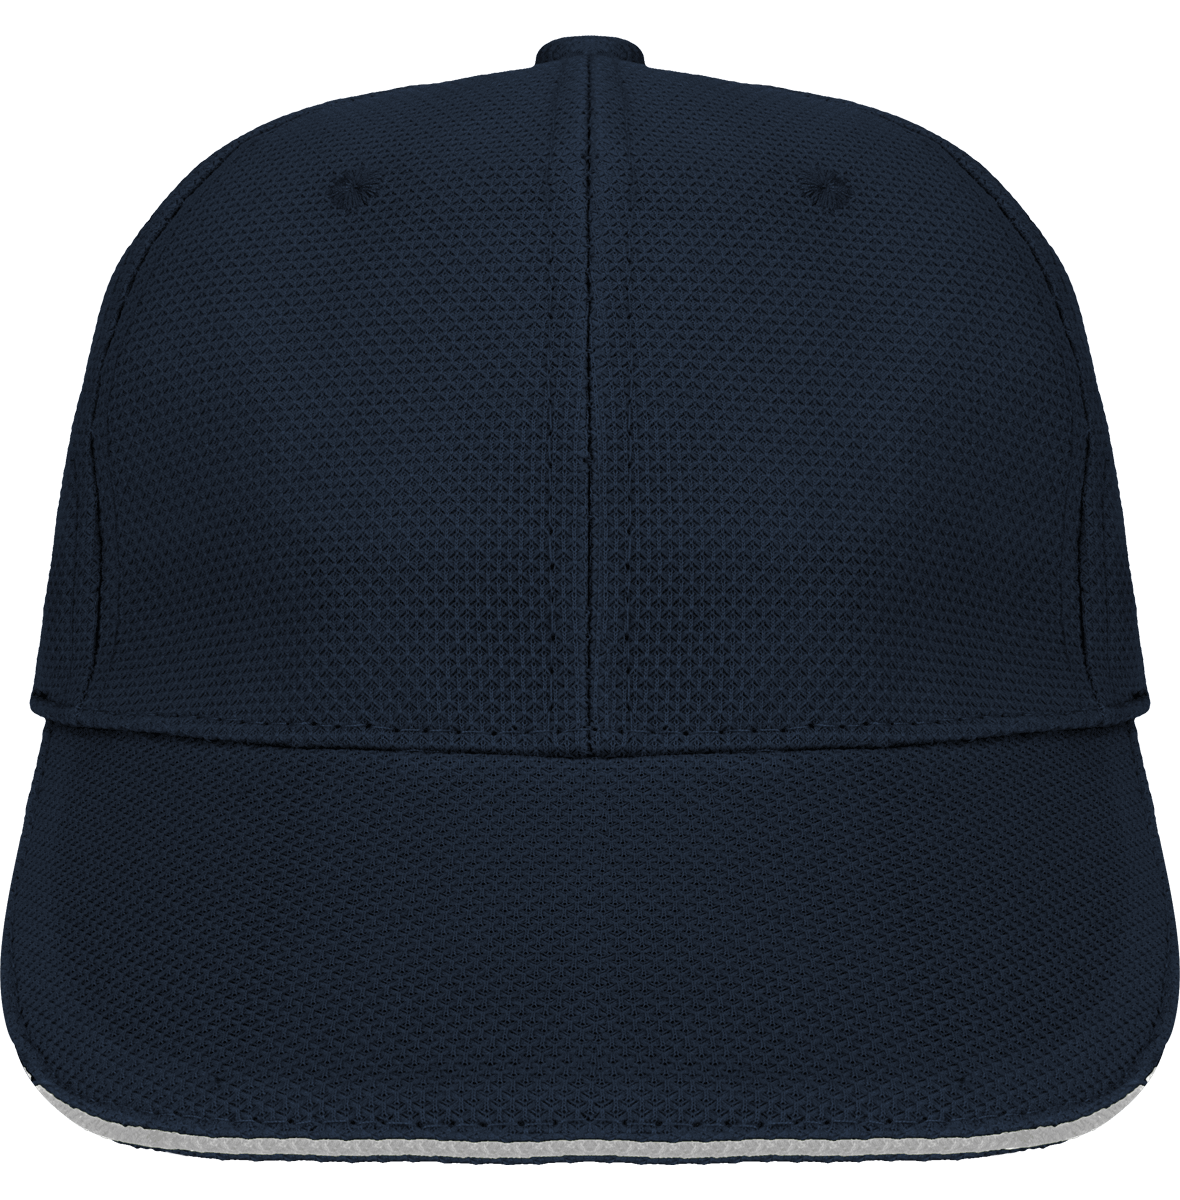 Casquette Sport Maille Piquée | 100% Polyester | Broderie  Navy / White